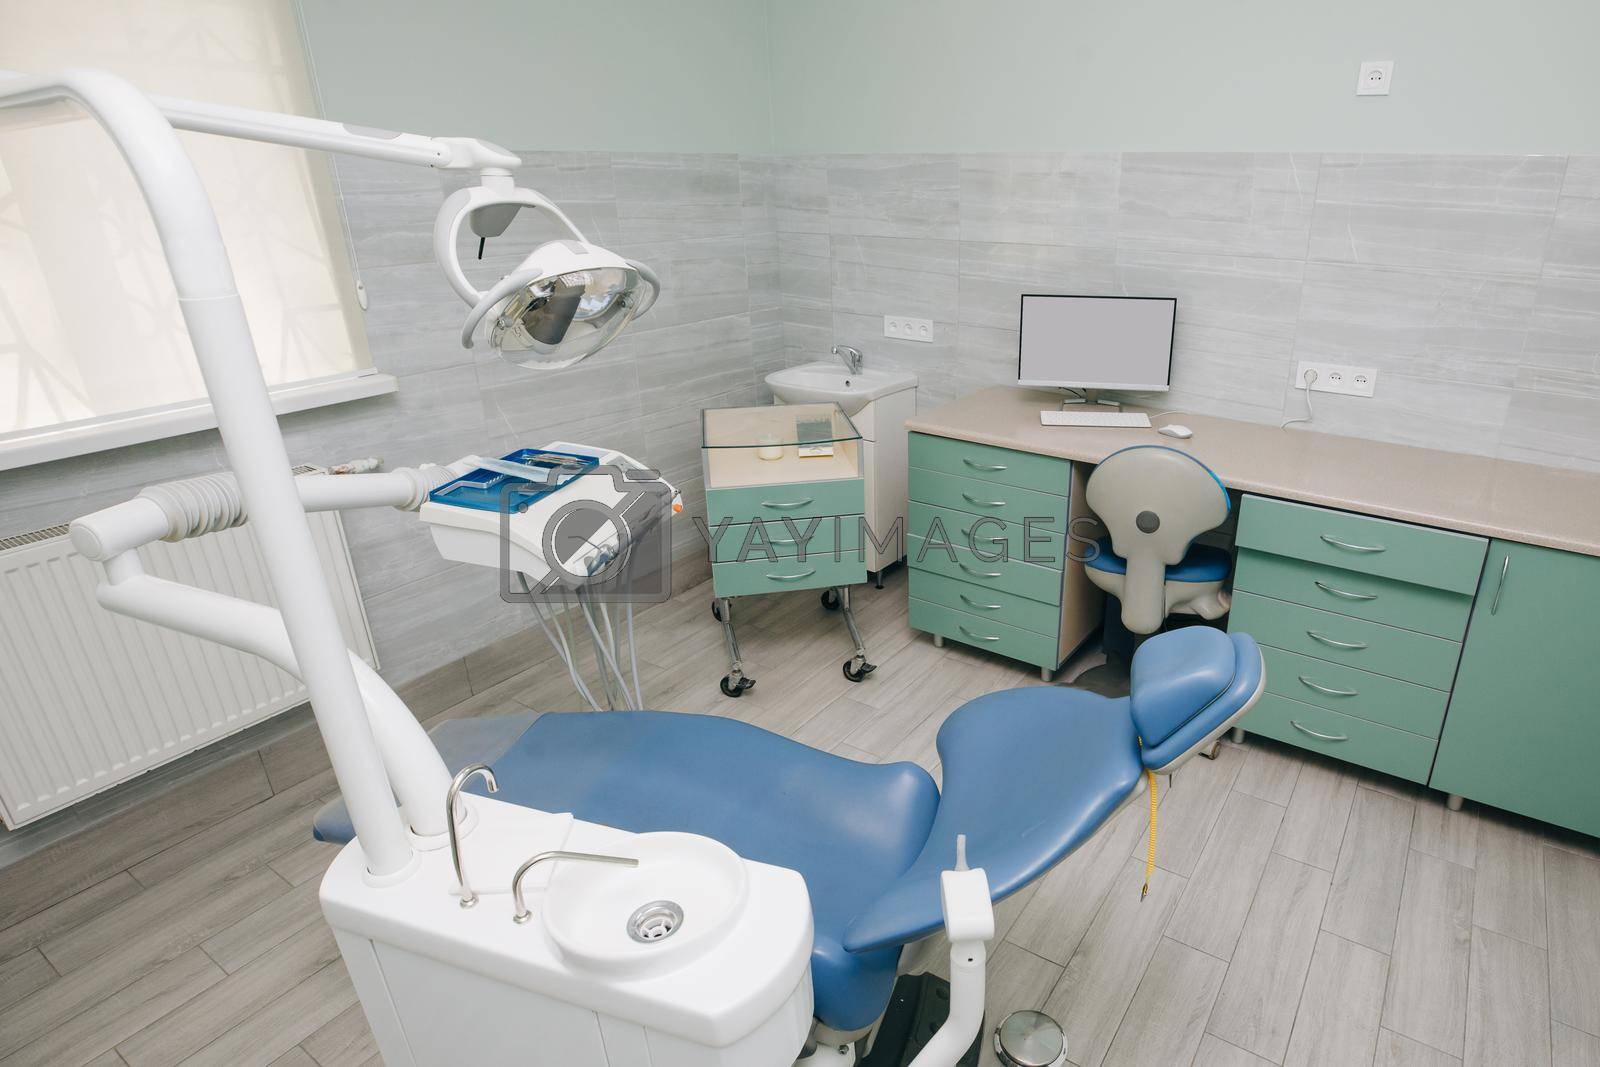 Dentist Office, Dental Hygiene, Dentist's Chair. Modern dental practice. Dental chair and other accessories used by dentists in blue, medic light